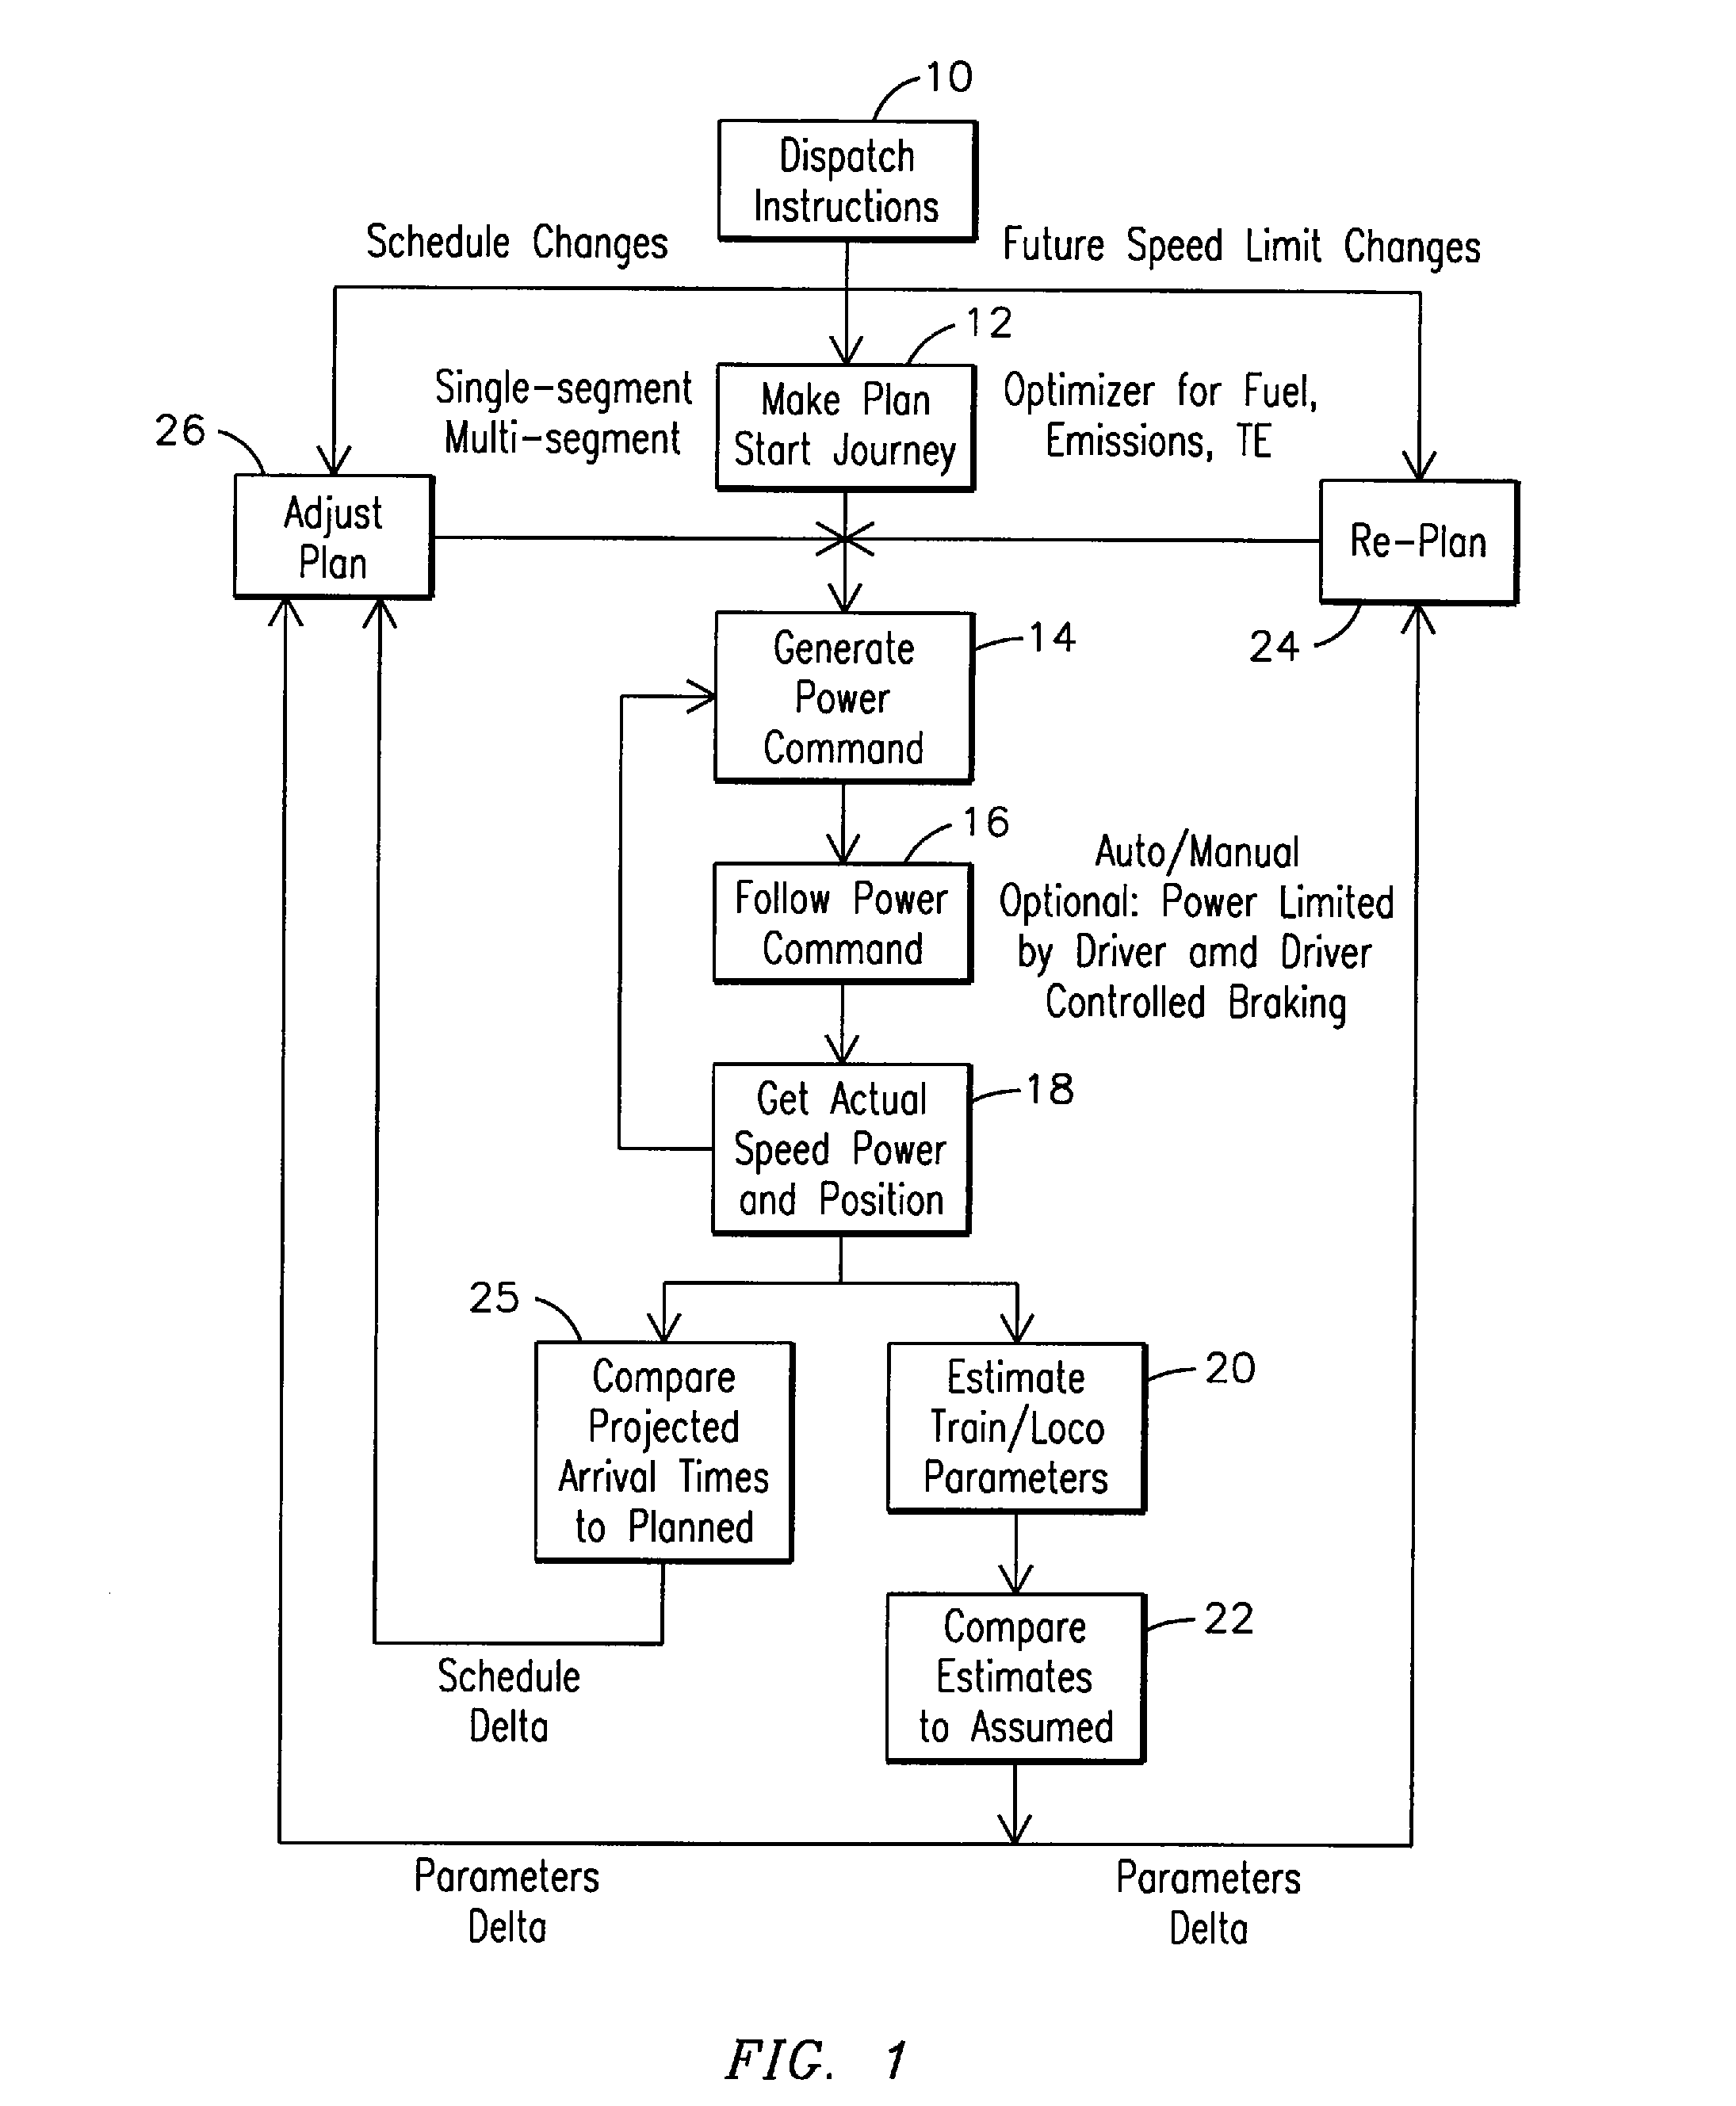 System, Method, and Computer Software Code for Instructing an Operator to Control a Powered System Having an Autonomous Controller